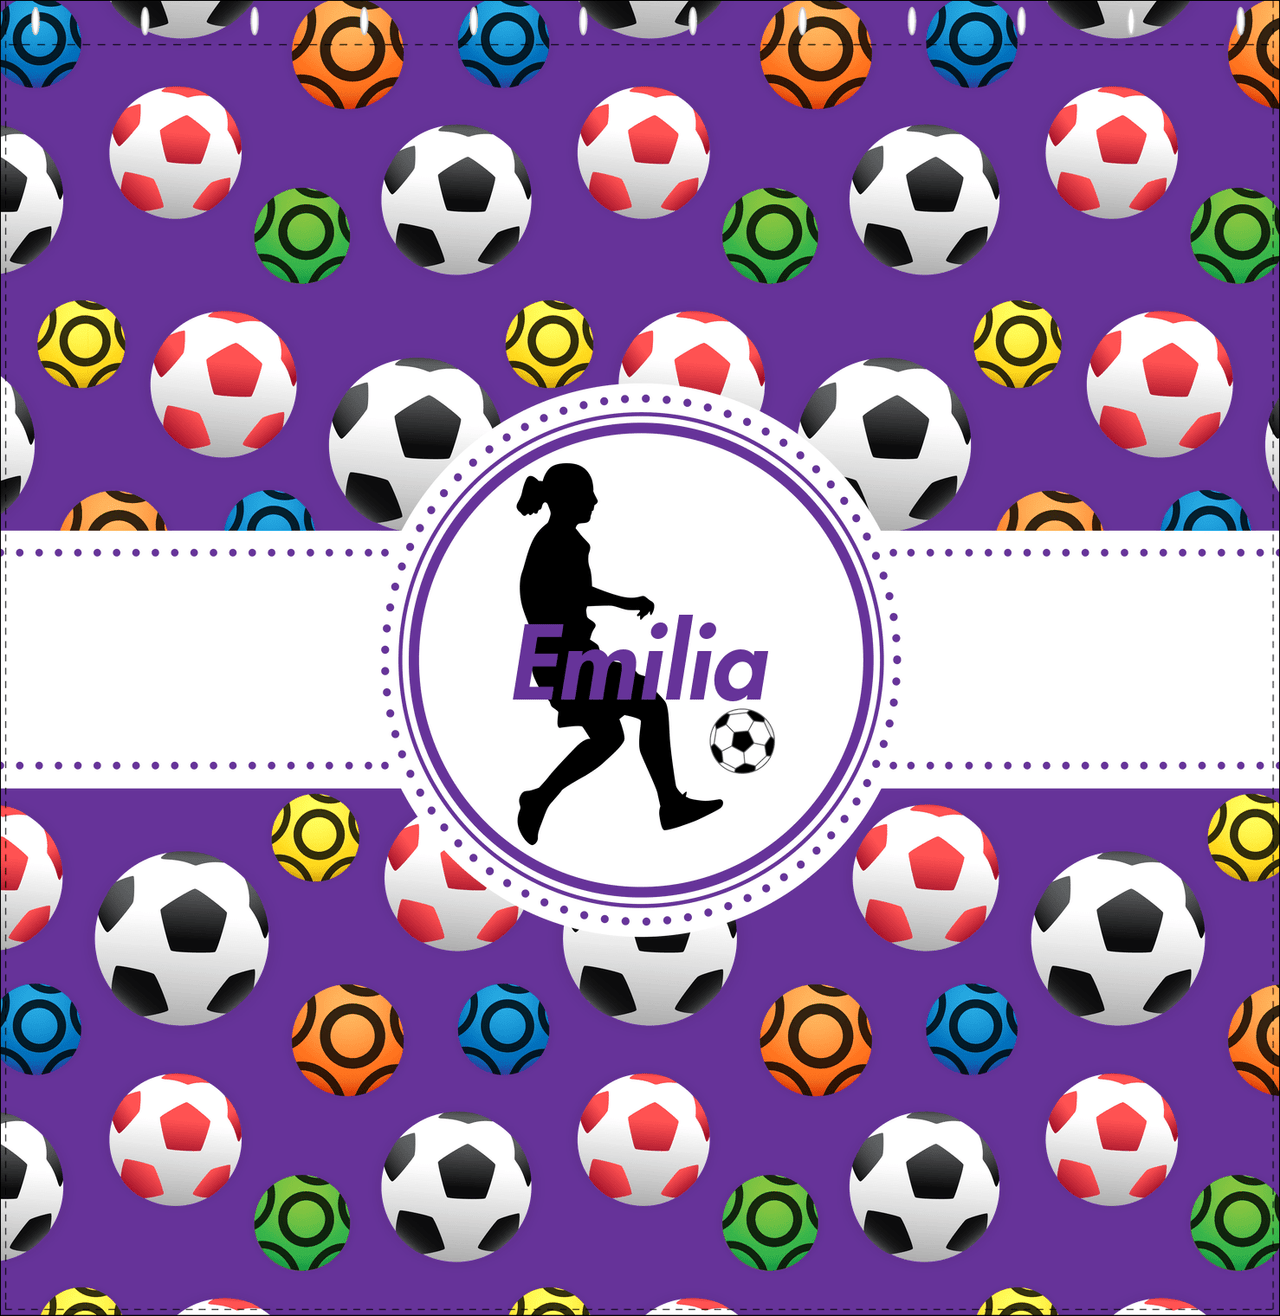 Personalized Soccer Shower Curtain XLVIII - Purple Background - Girl Silhouette IV - Decorate View